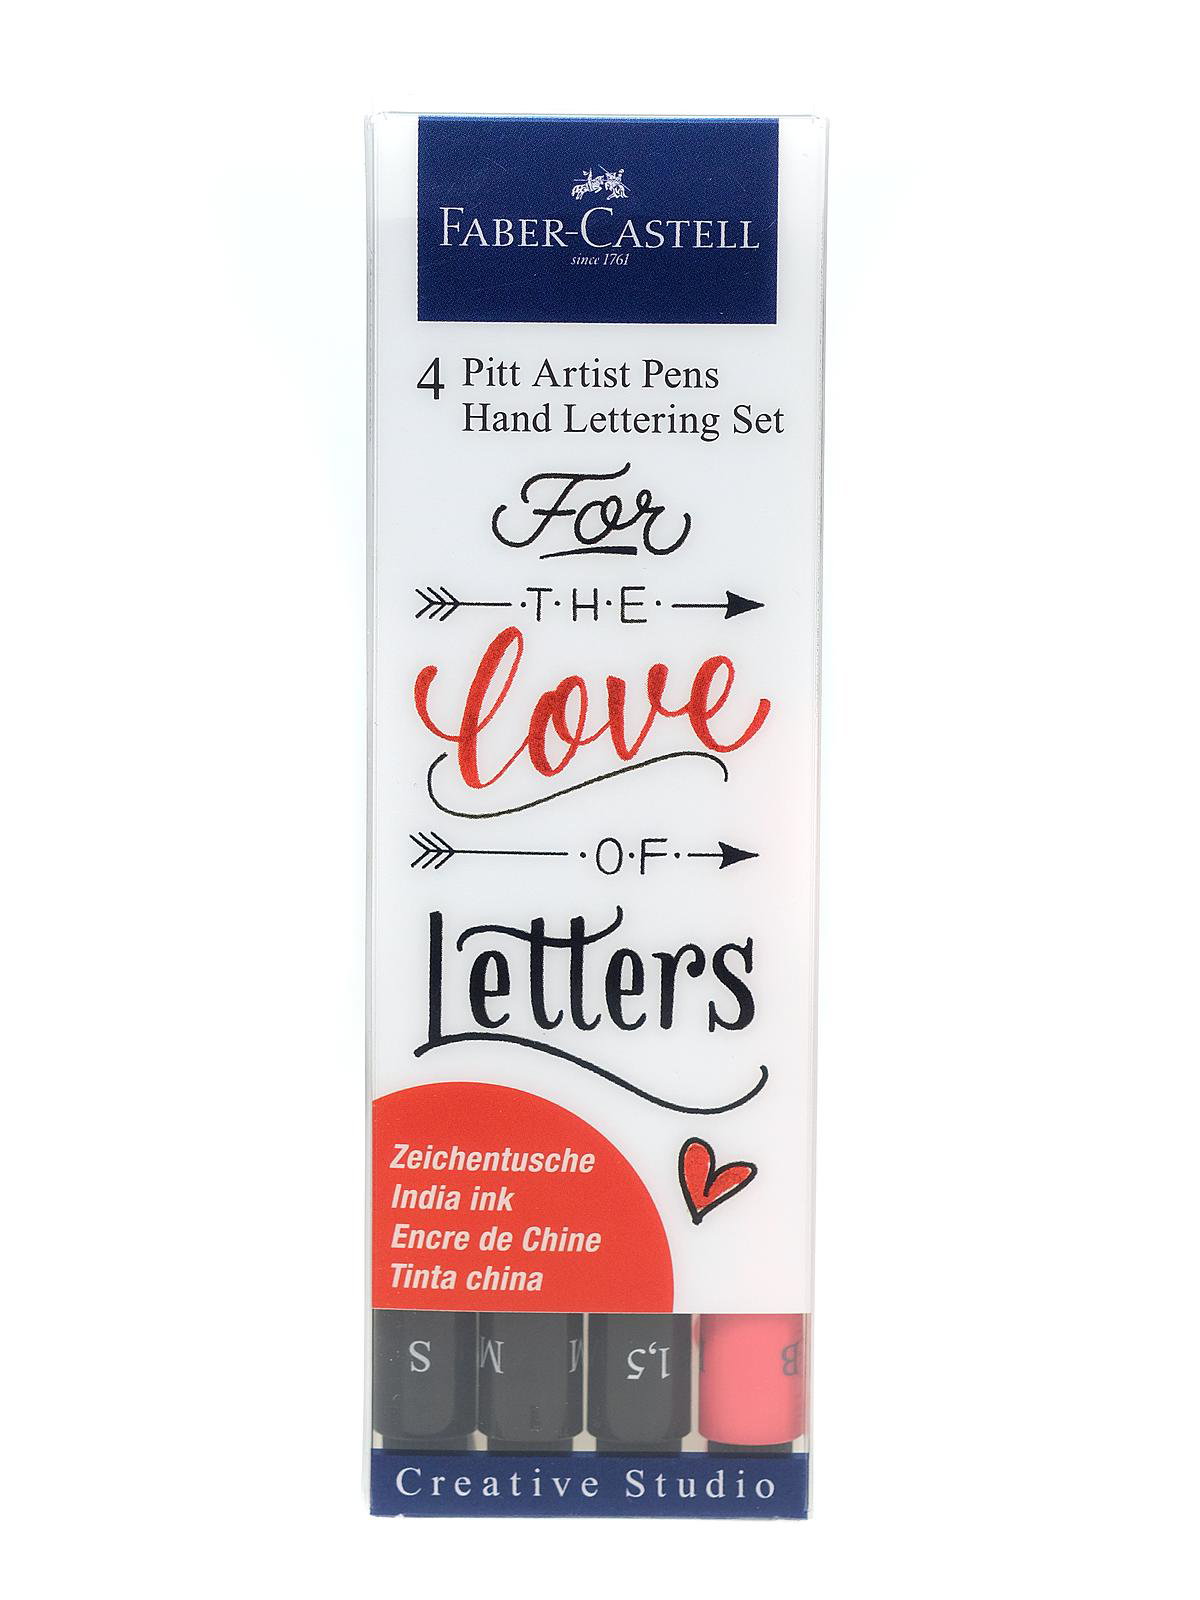 For The Love of Letters